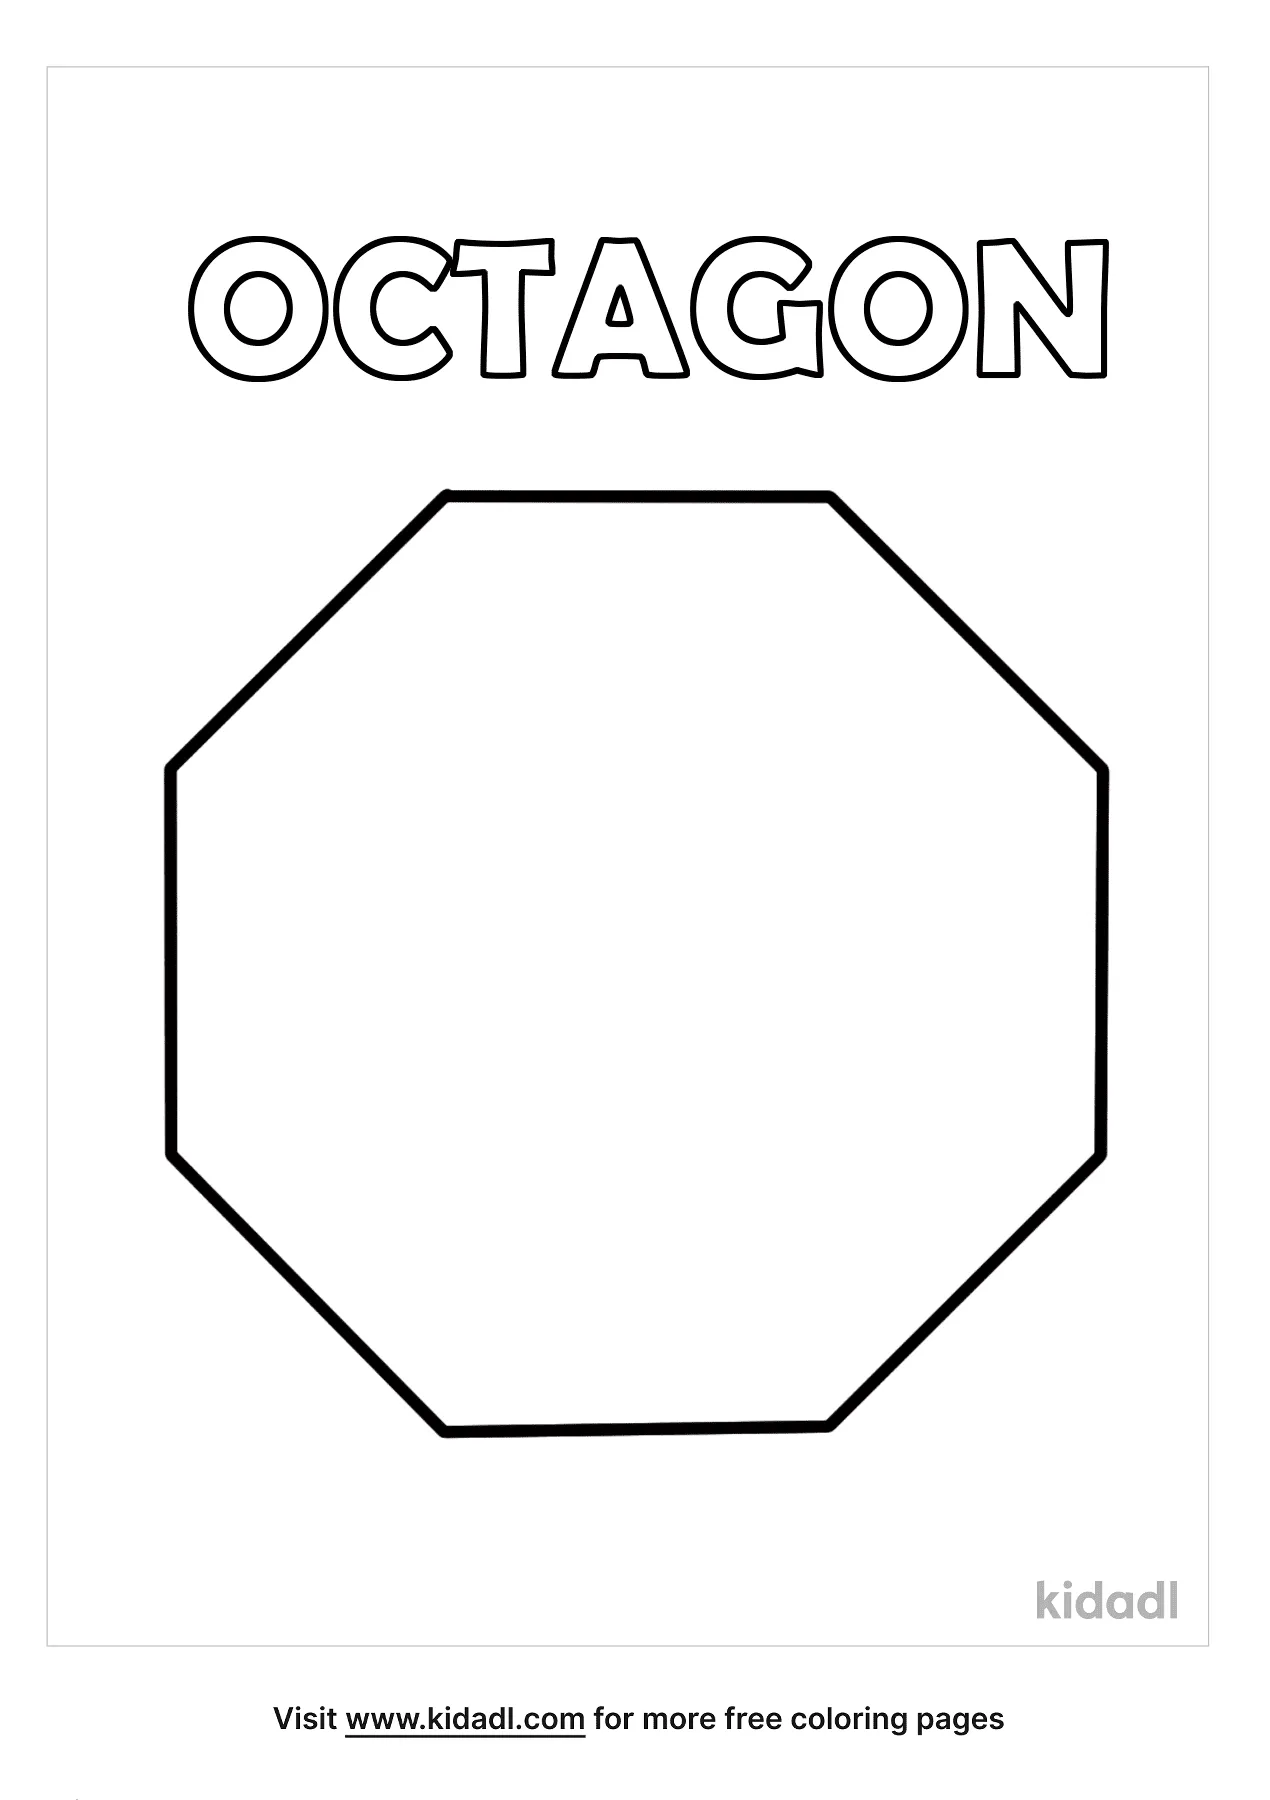 Free octagon coloring page coloring page printables